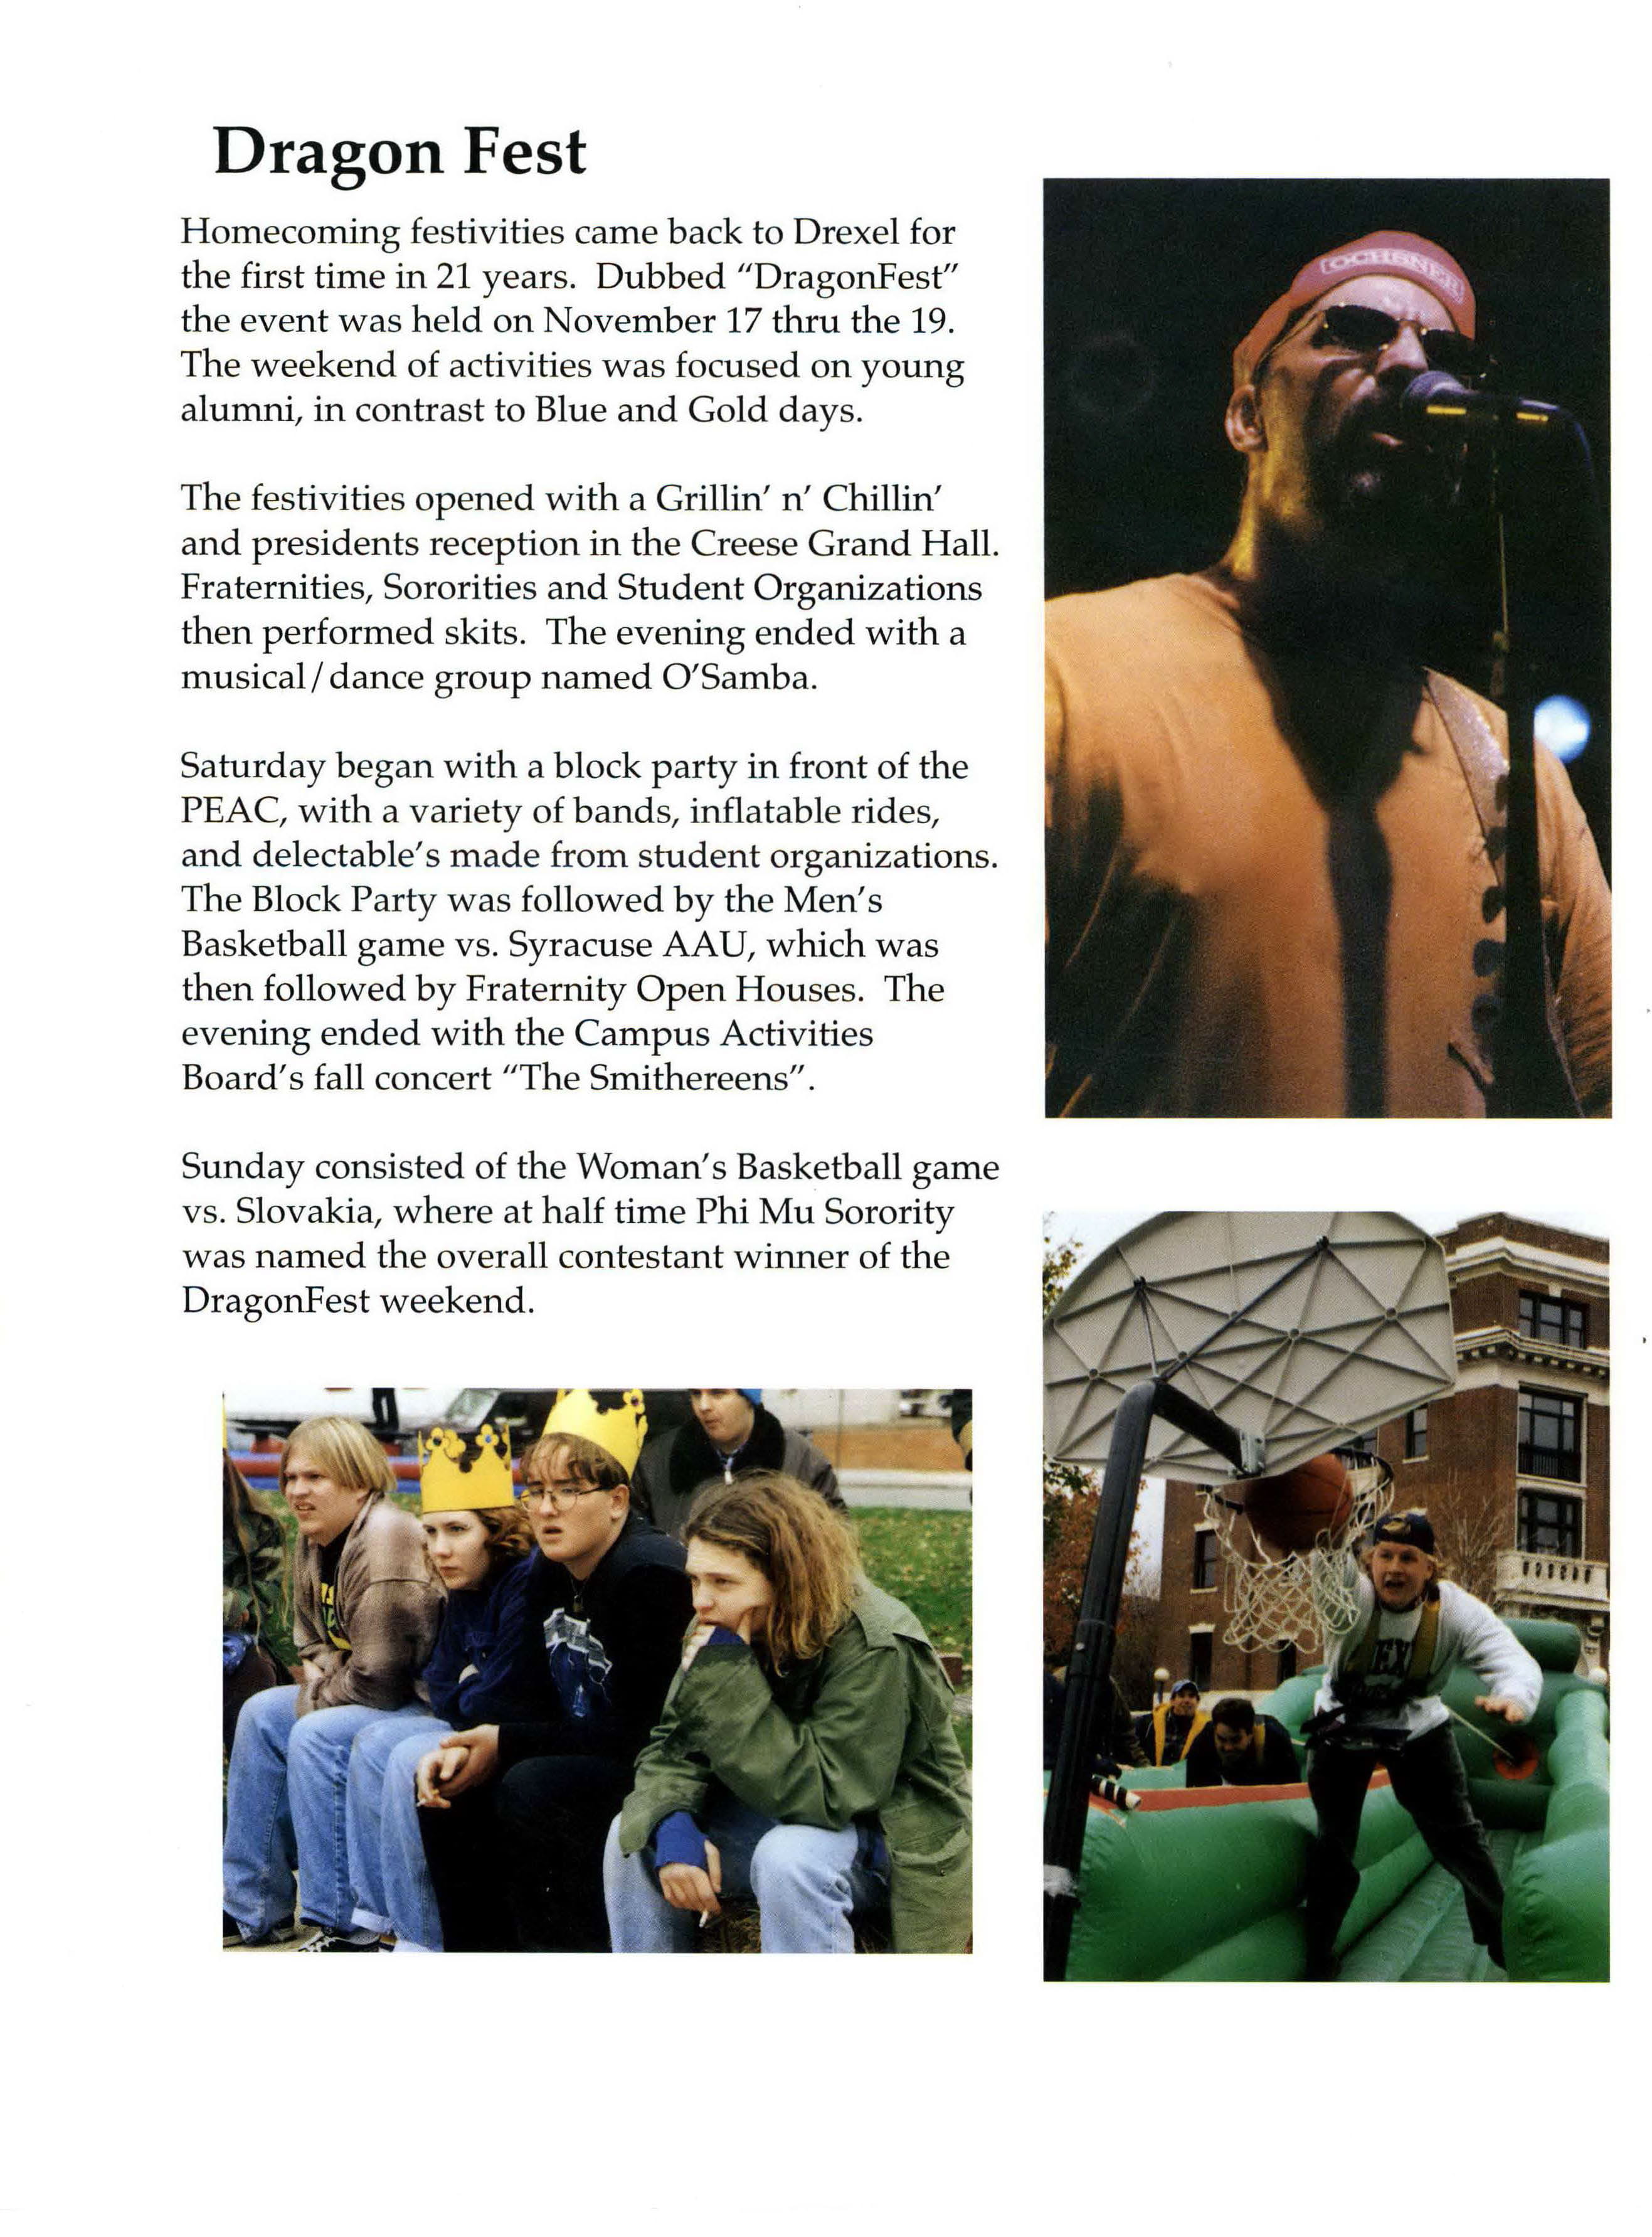 A page from the 1996 Lexerd yearbook describing "DragonFest." Photo courtesy University Archives.